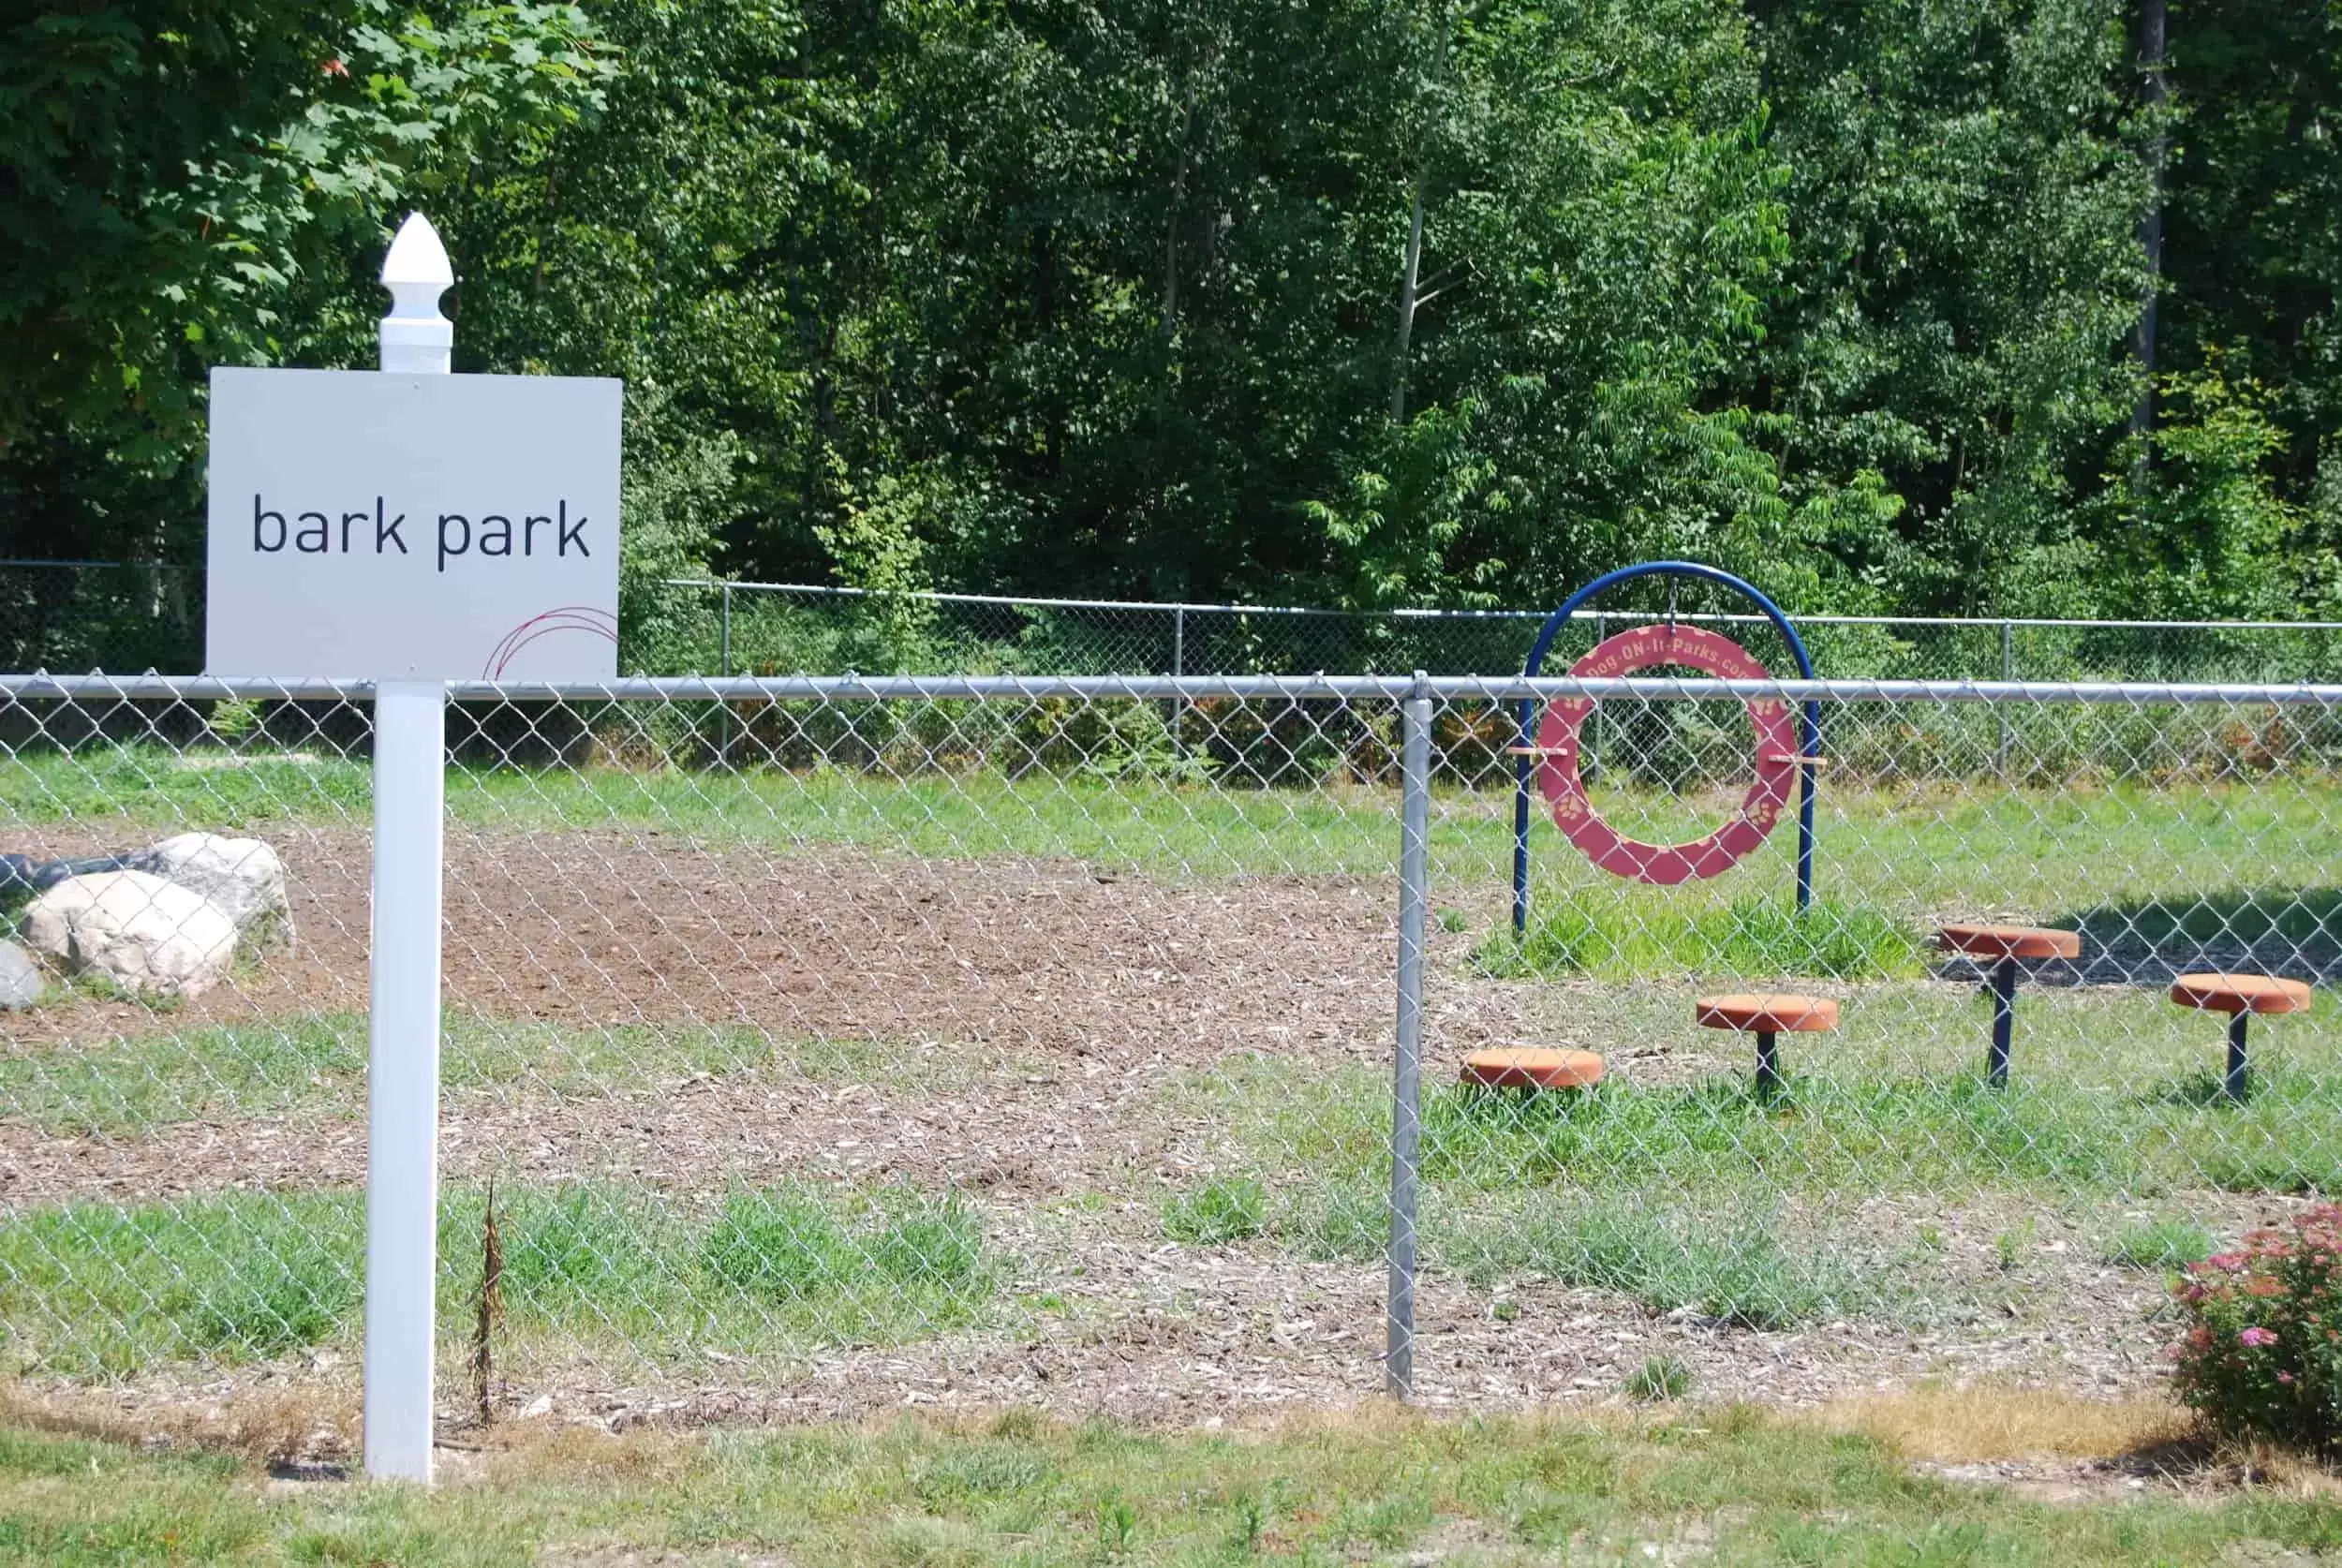 The Bark Park outdoor play area for dogs has fun agility obstacles.